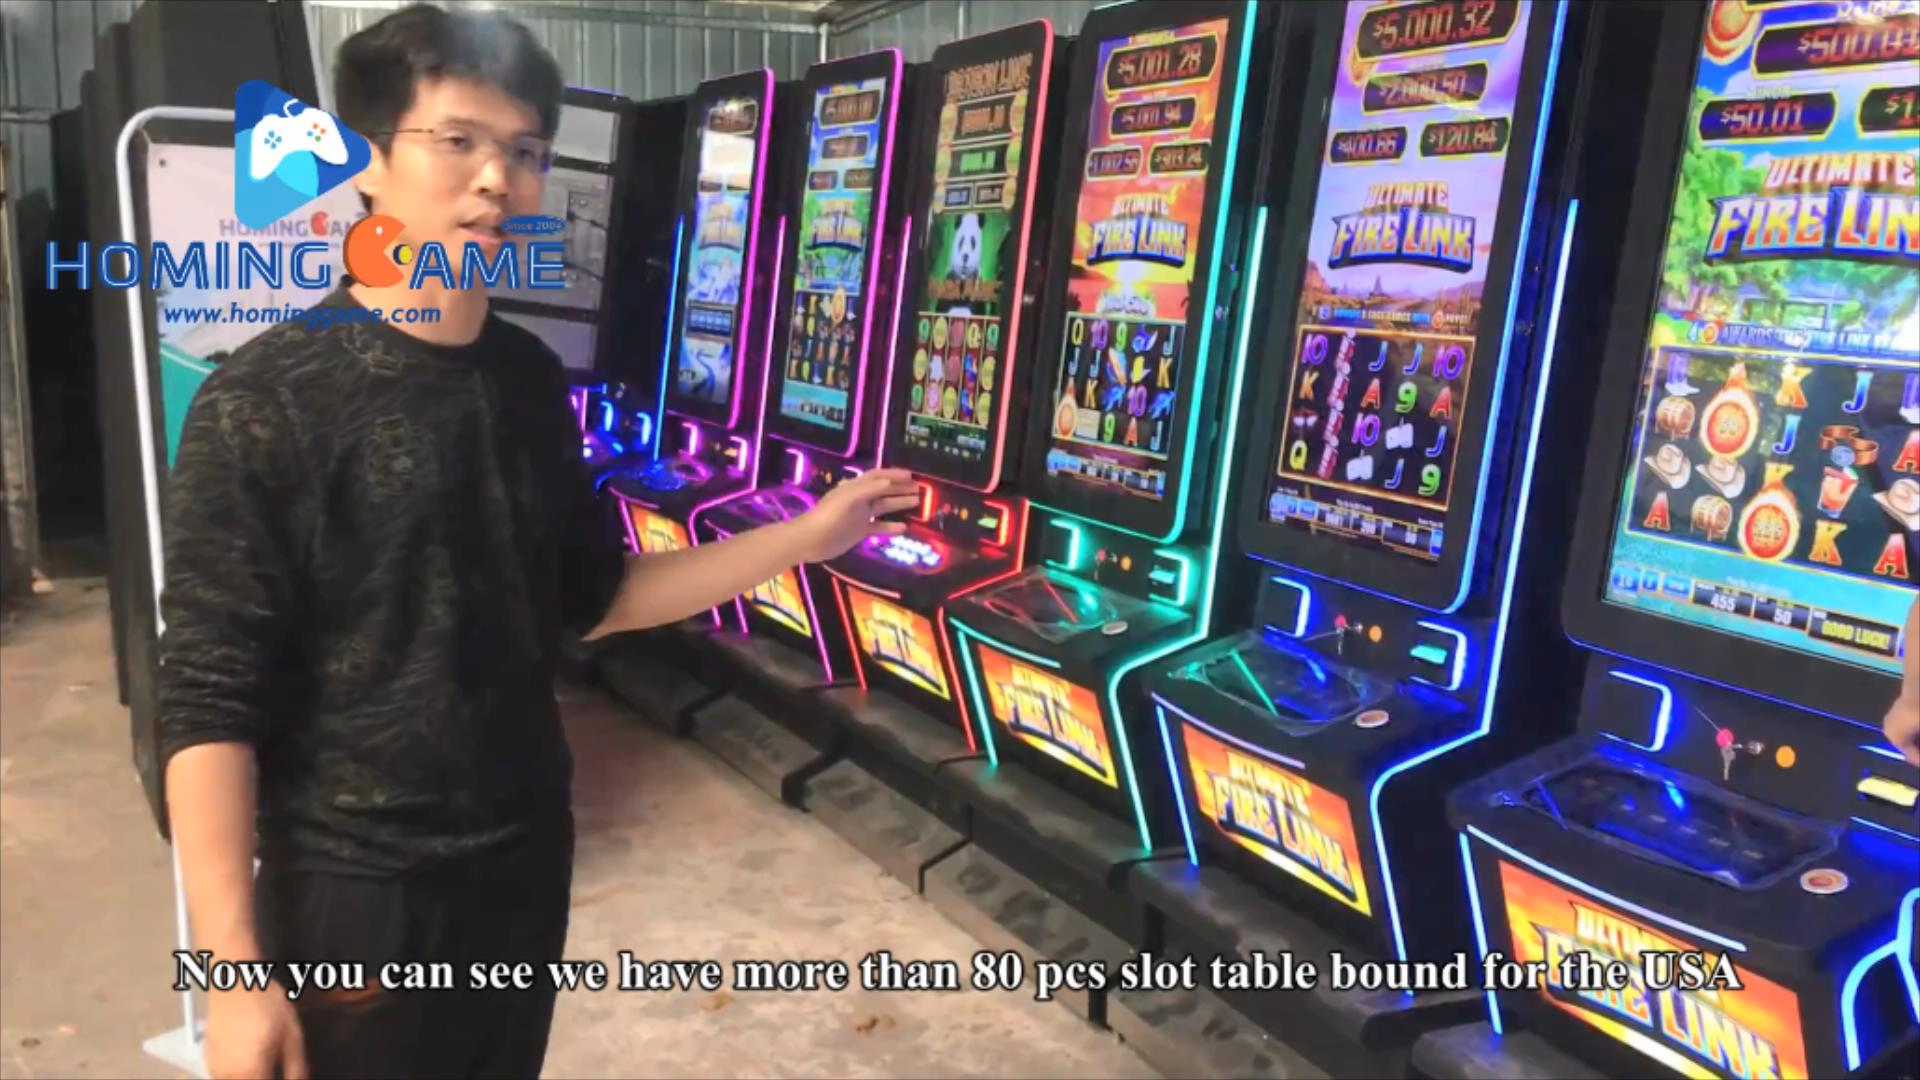 2021 USA Best Slot Table Game Machine Manufactuer By HomingGame Producing All kind of Slot Table,Fire link,Dragon link,Fusion 4,golden master,money gold,lighting ,panda link slot table game machine (Order Call Whatsapp:+8618688409495),43